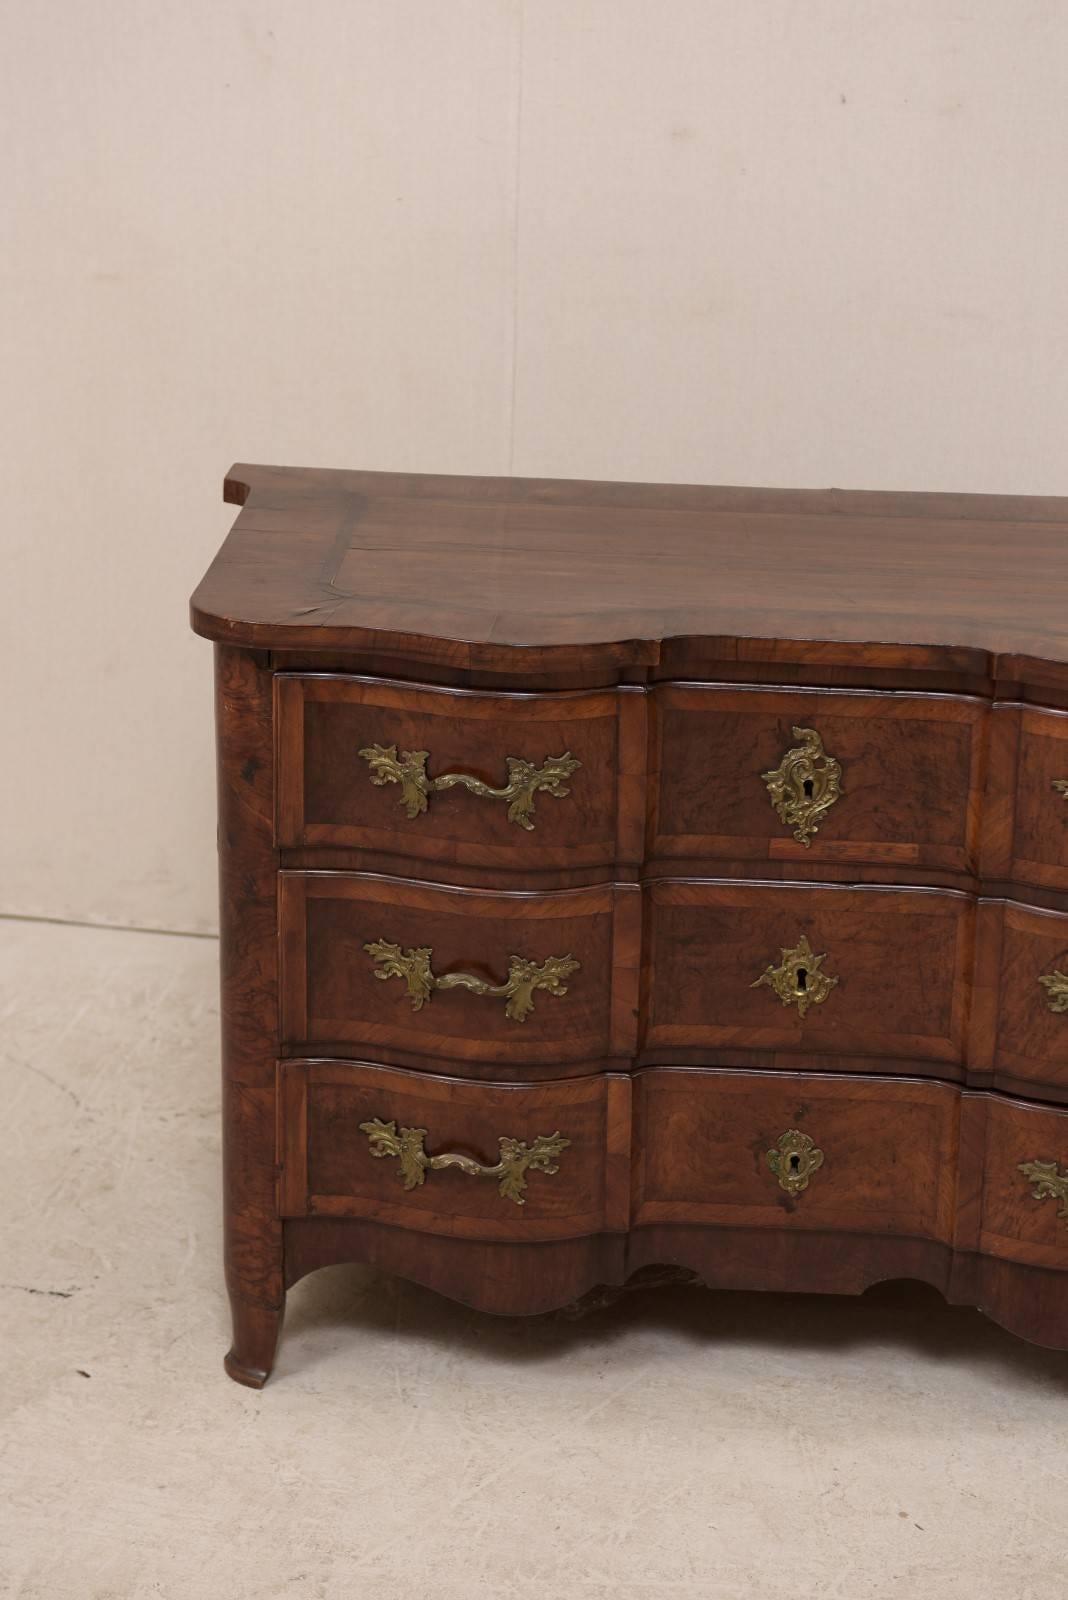 Period Baroque Swedish Wood Chest with Serpentine Front, circa 1725 In Good Condition For Sale In Atlanta, GA